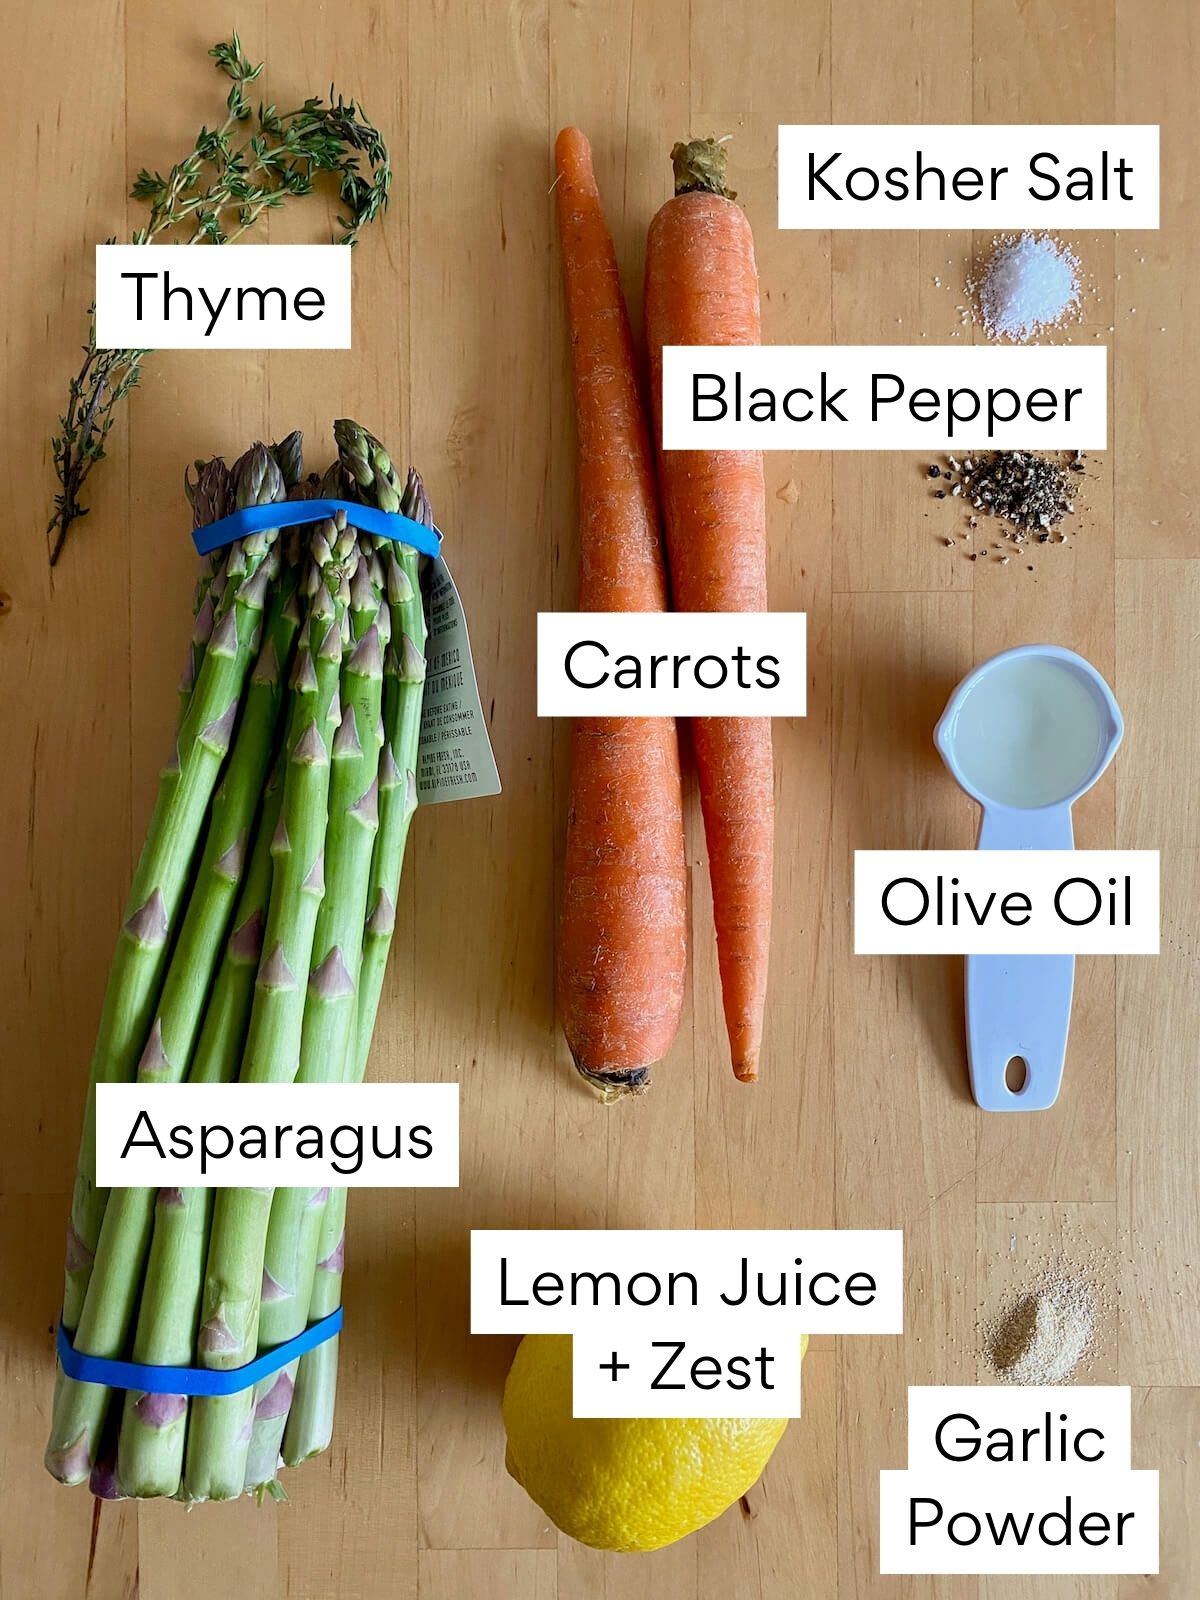 The ingredients to make roasted carrots and asparagus. Each ingredient is labeled with text. They include thyme, kosher salt, black pepper, carrots, asparagus, olive oil, lemon juice and zest, and garlic powder.